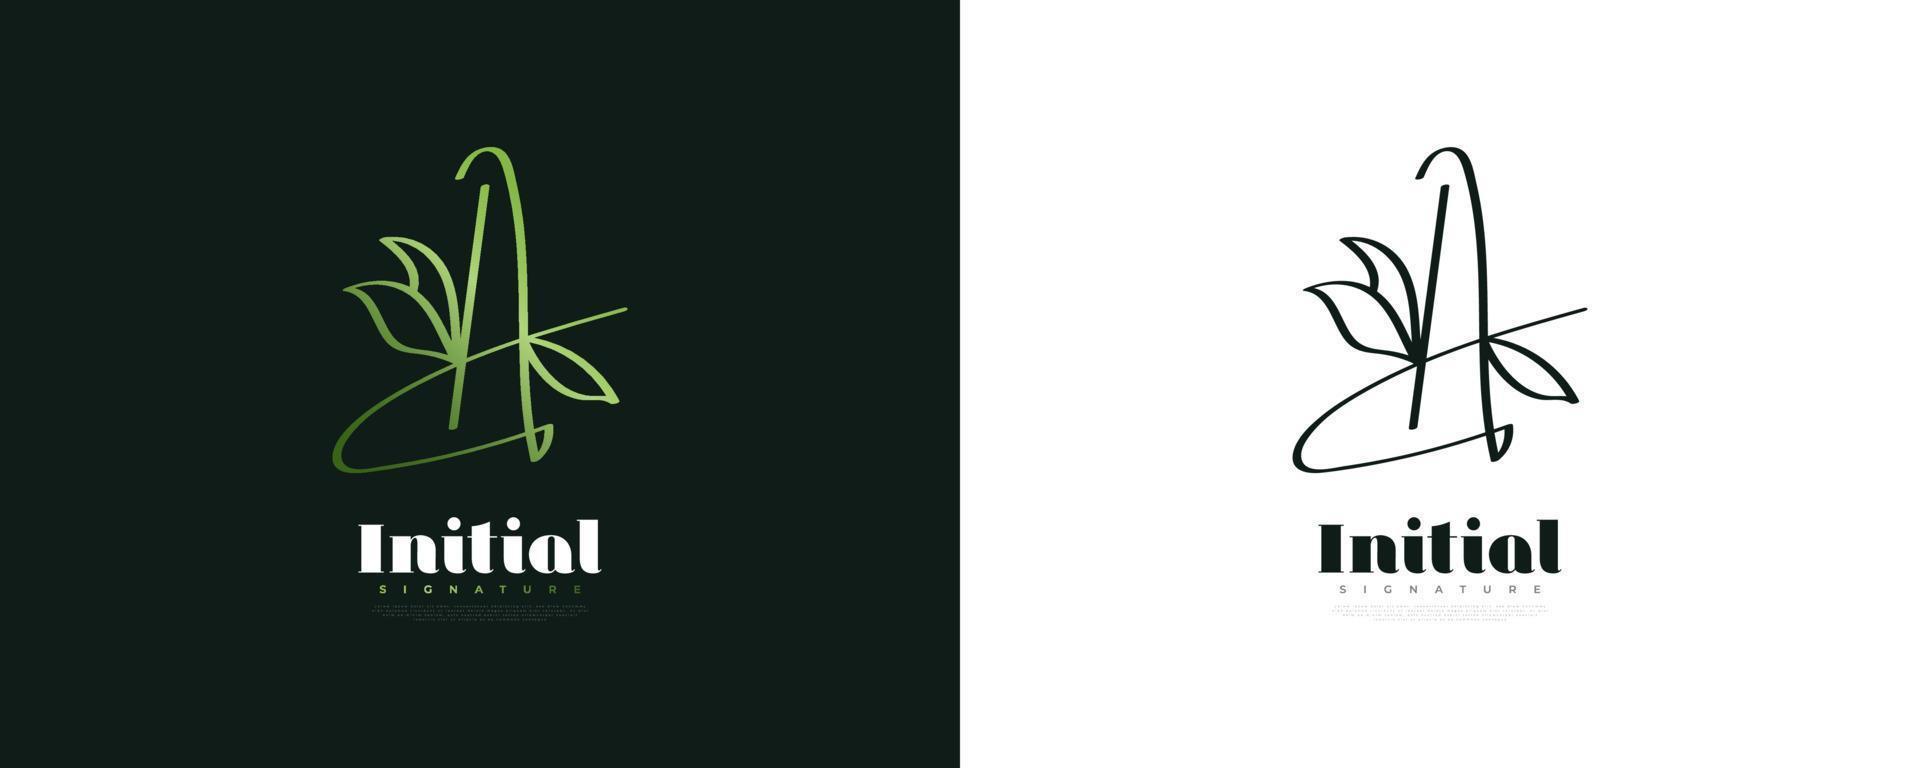 Letter A Logo Design with Leaf and Nature Concept. Letter A Signature Logo or Symbol with Handwriting Style for Business Brand Identity vector